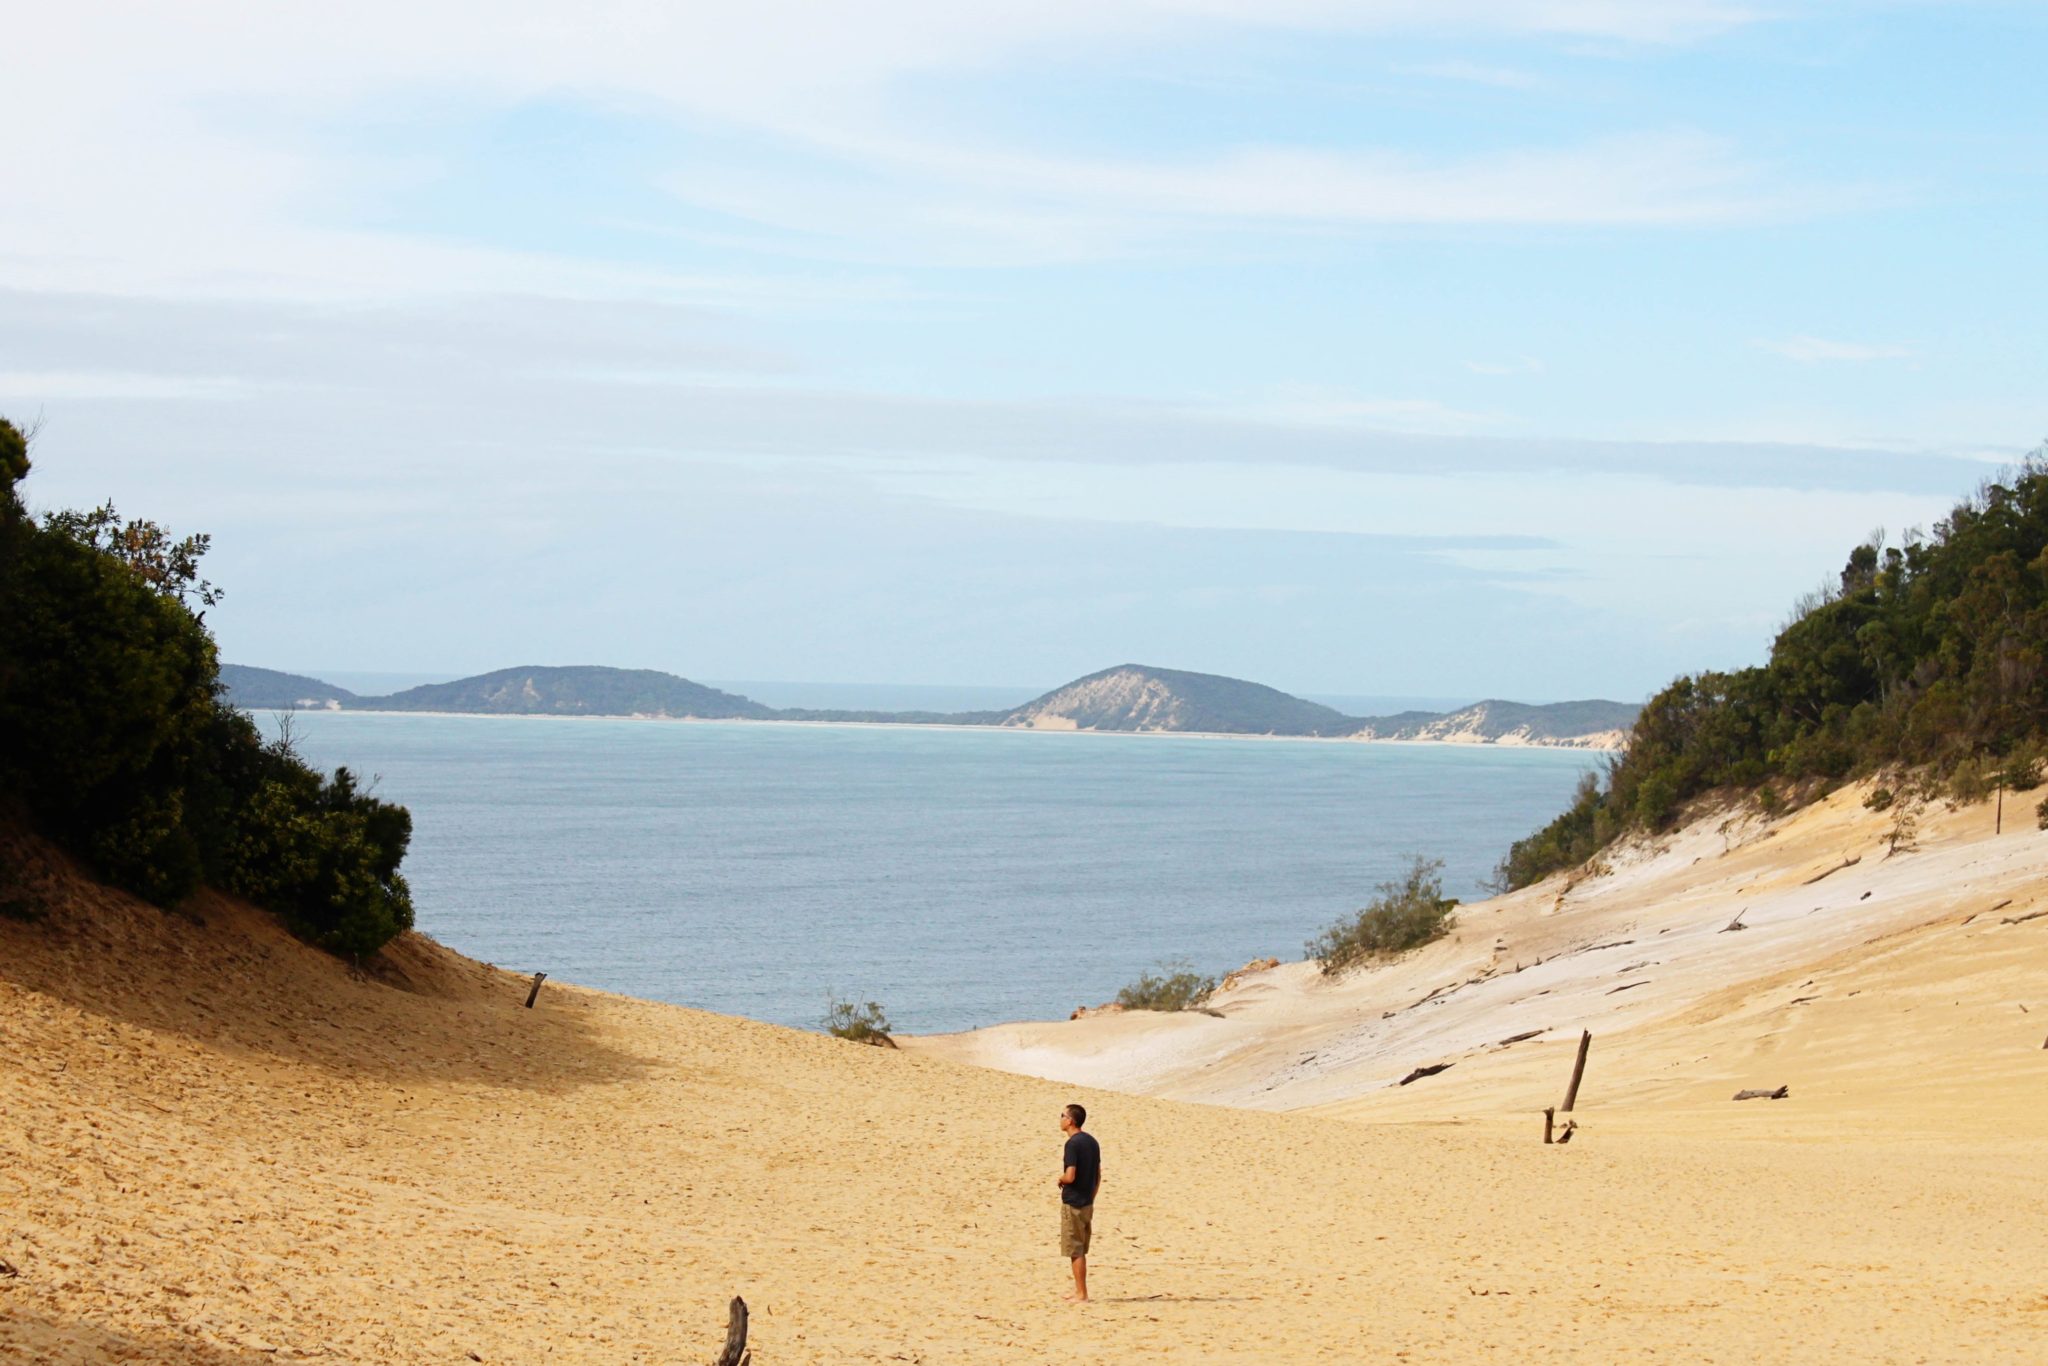 Take the Carlo Sand Blow Track in the Great Sandy National Park to see some spectacular dunes over looking the beach- 7 unforgettable things to do along Australia's Sunshine Coast #australia #sunshinecoast #greatsandynationalpark #simplywander